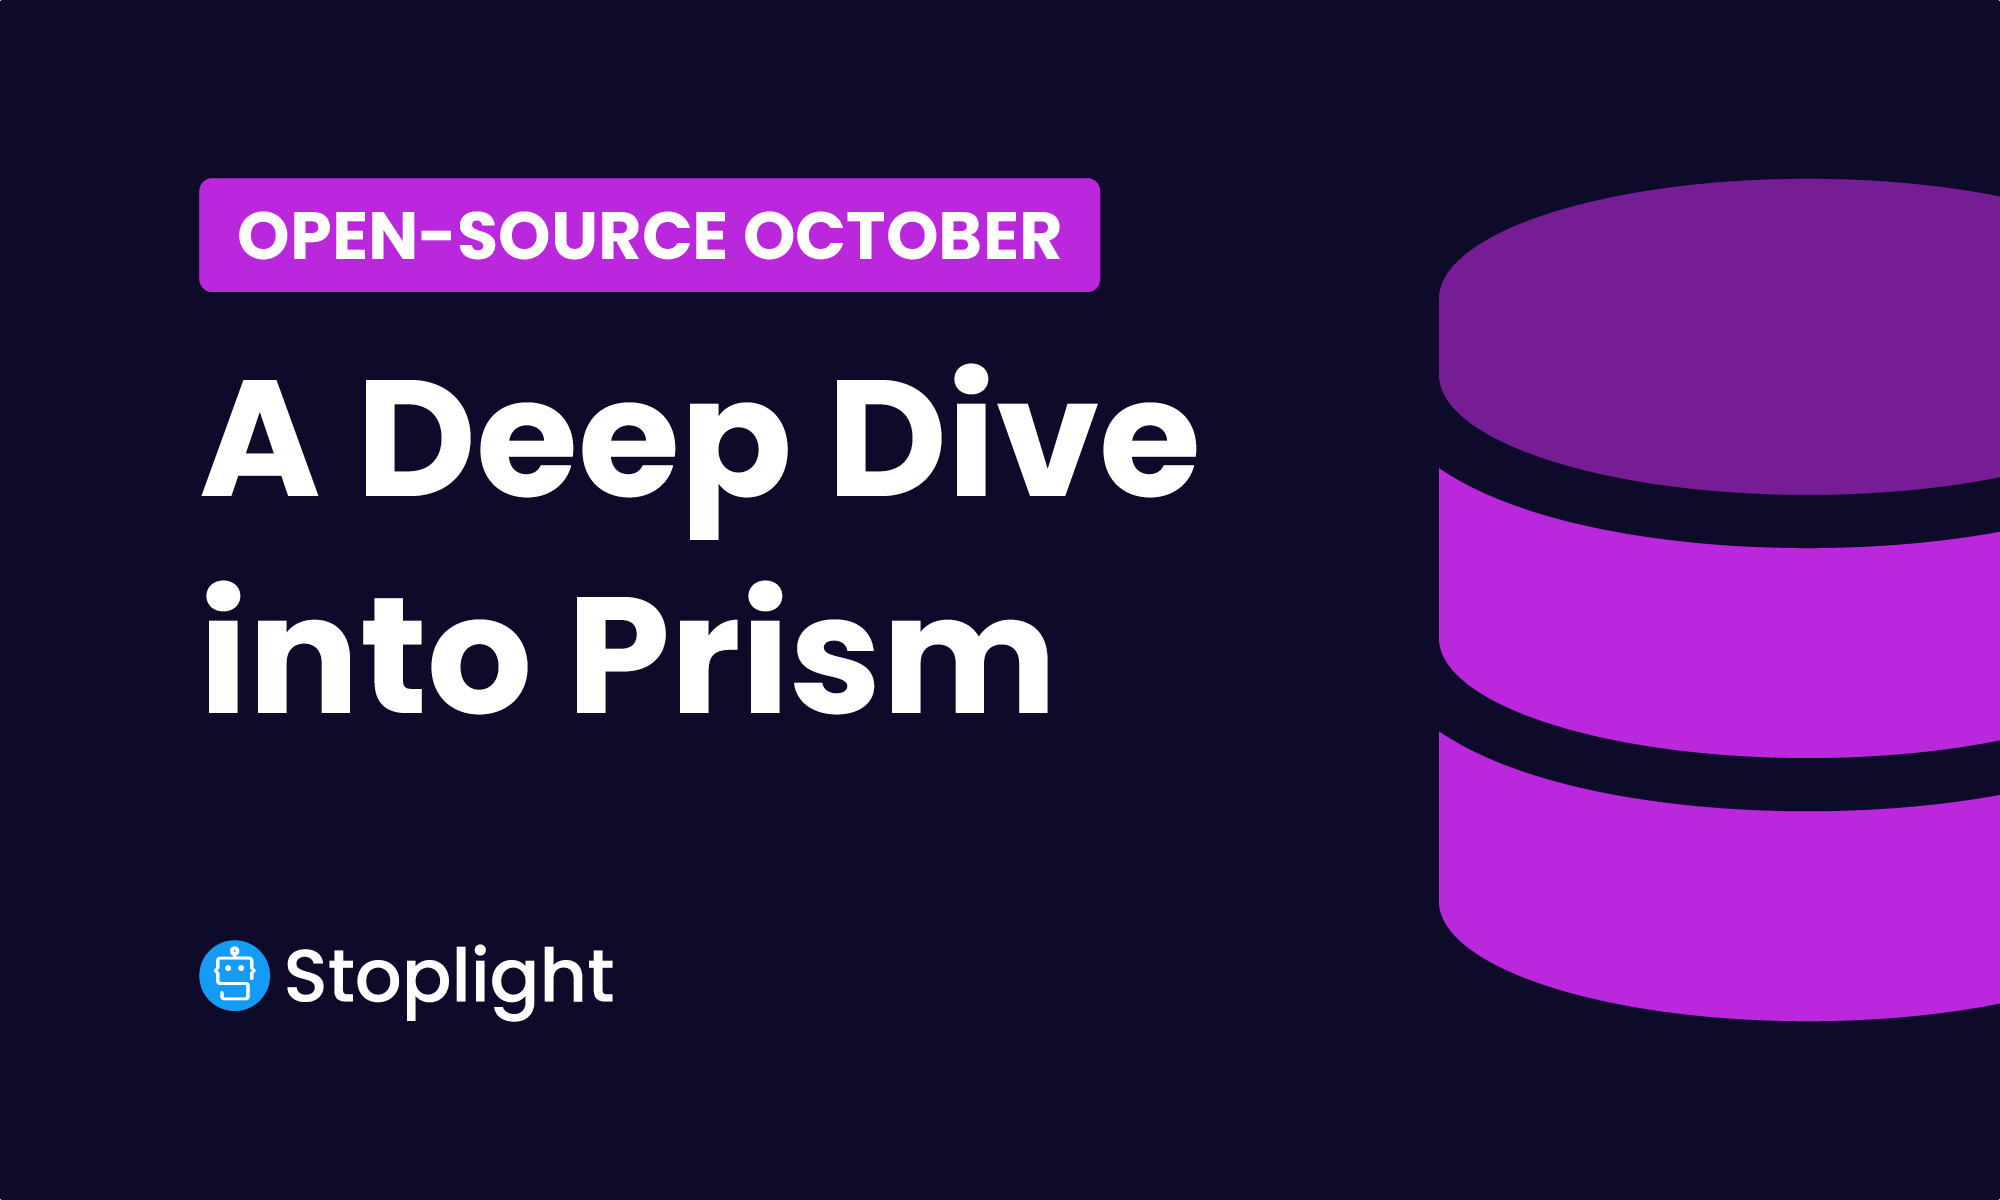 A Deep Dive into Prism for Open-Source October